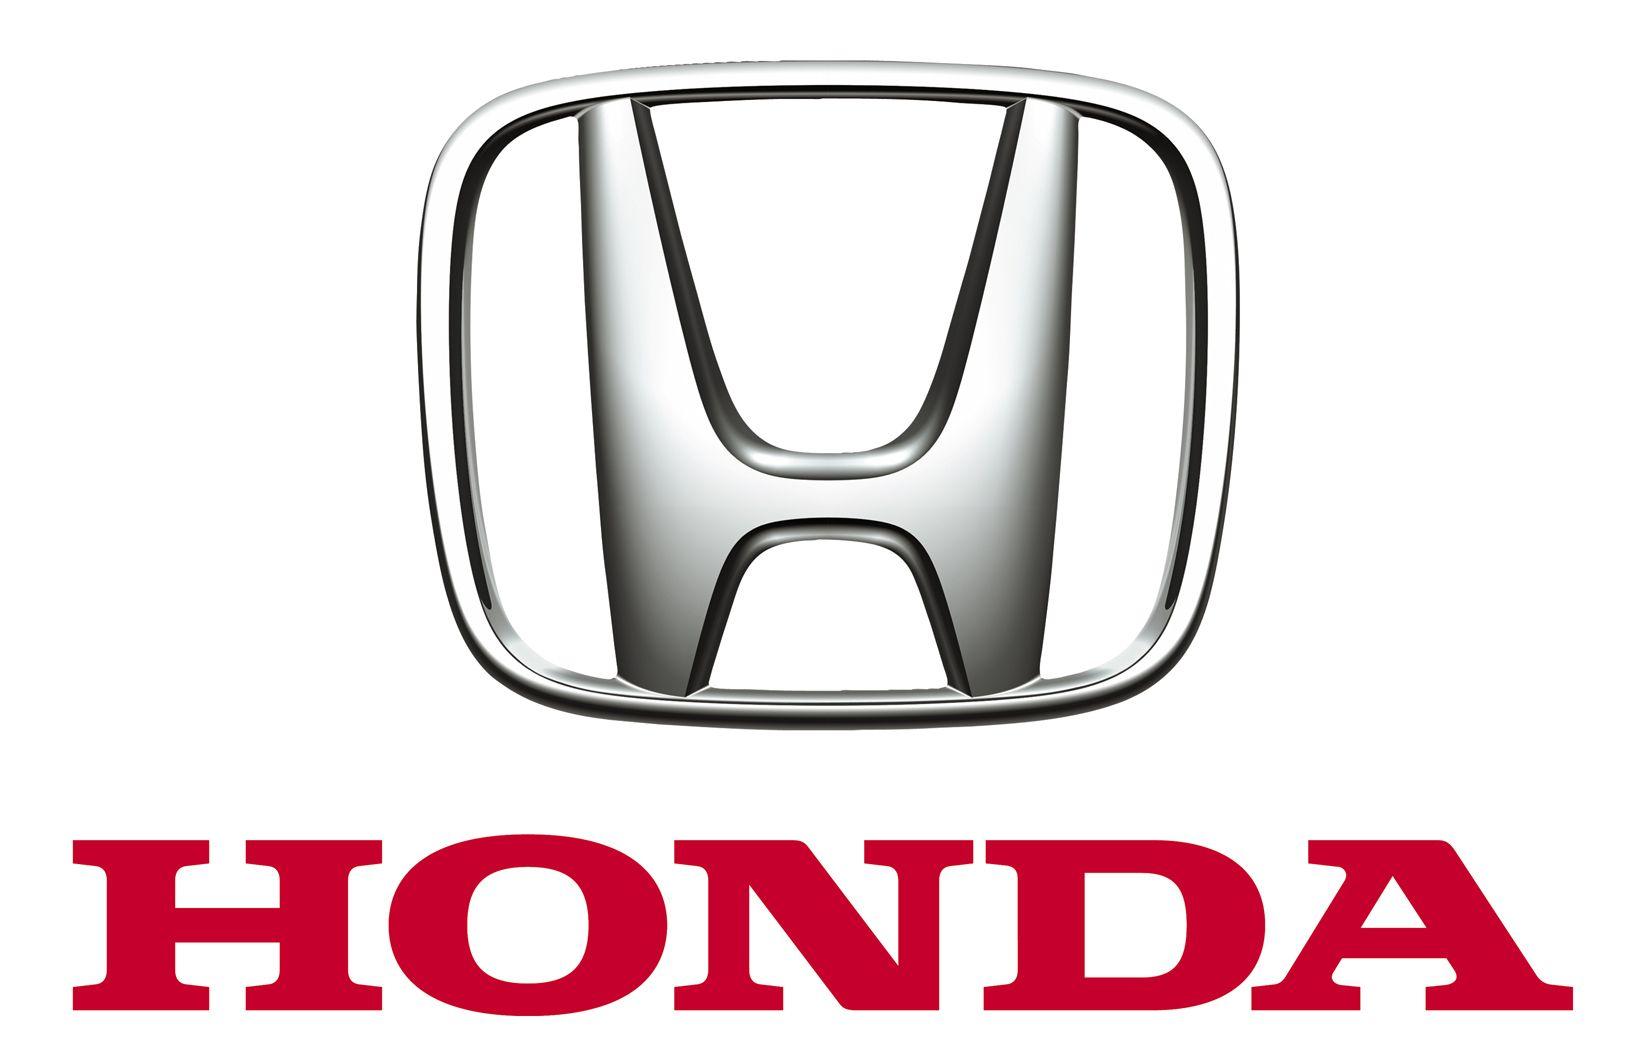 Honda HR-V Logo - The Uniquely Personal and Functional 2016 Honda HR-V Launches in ...